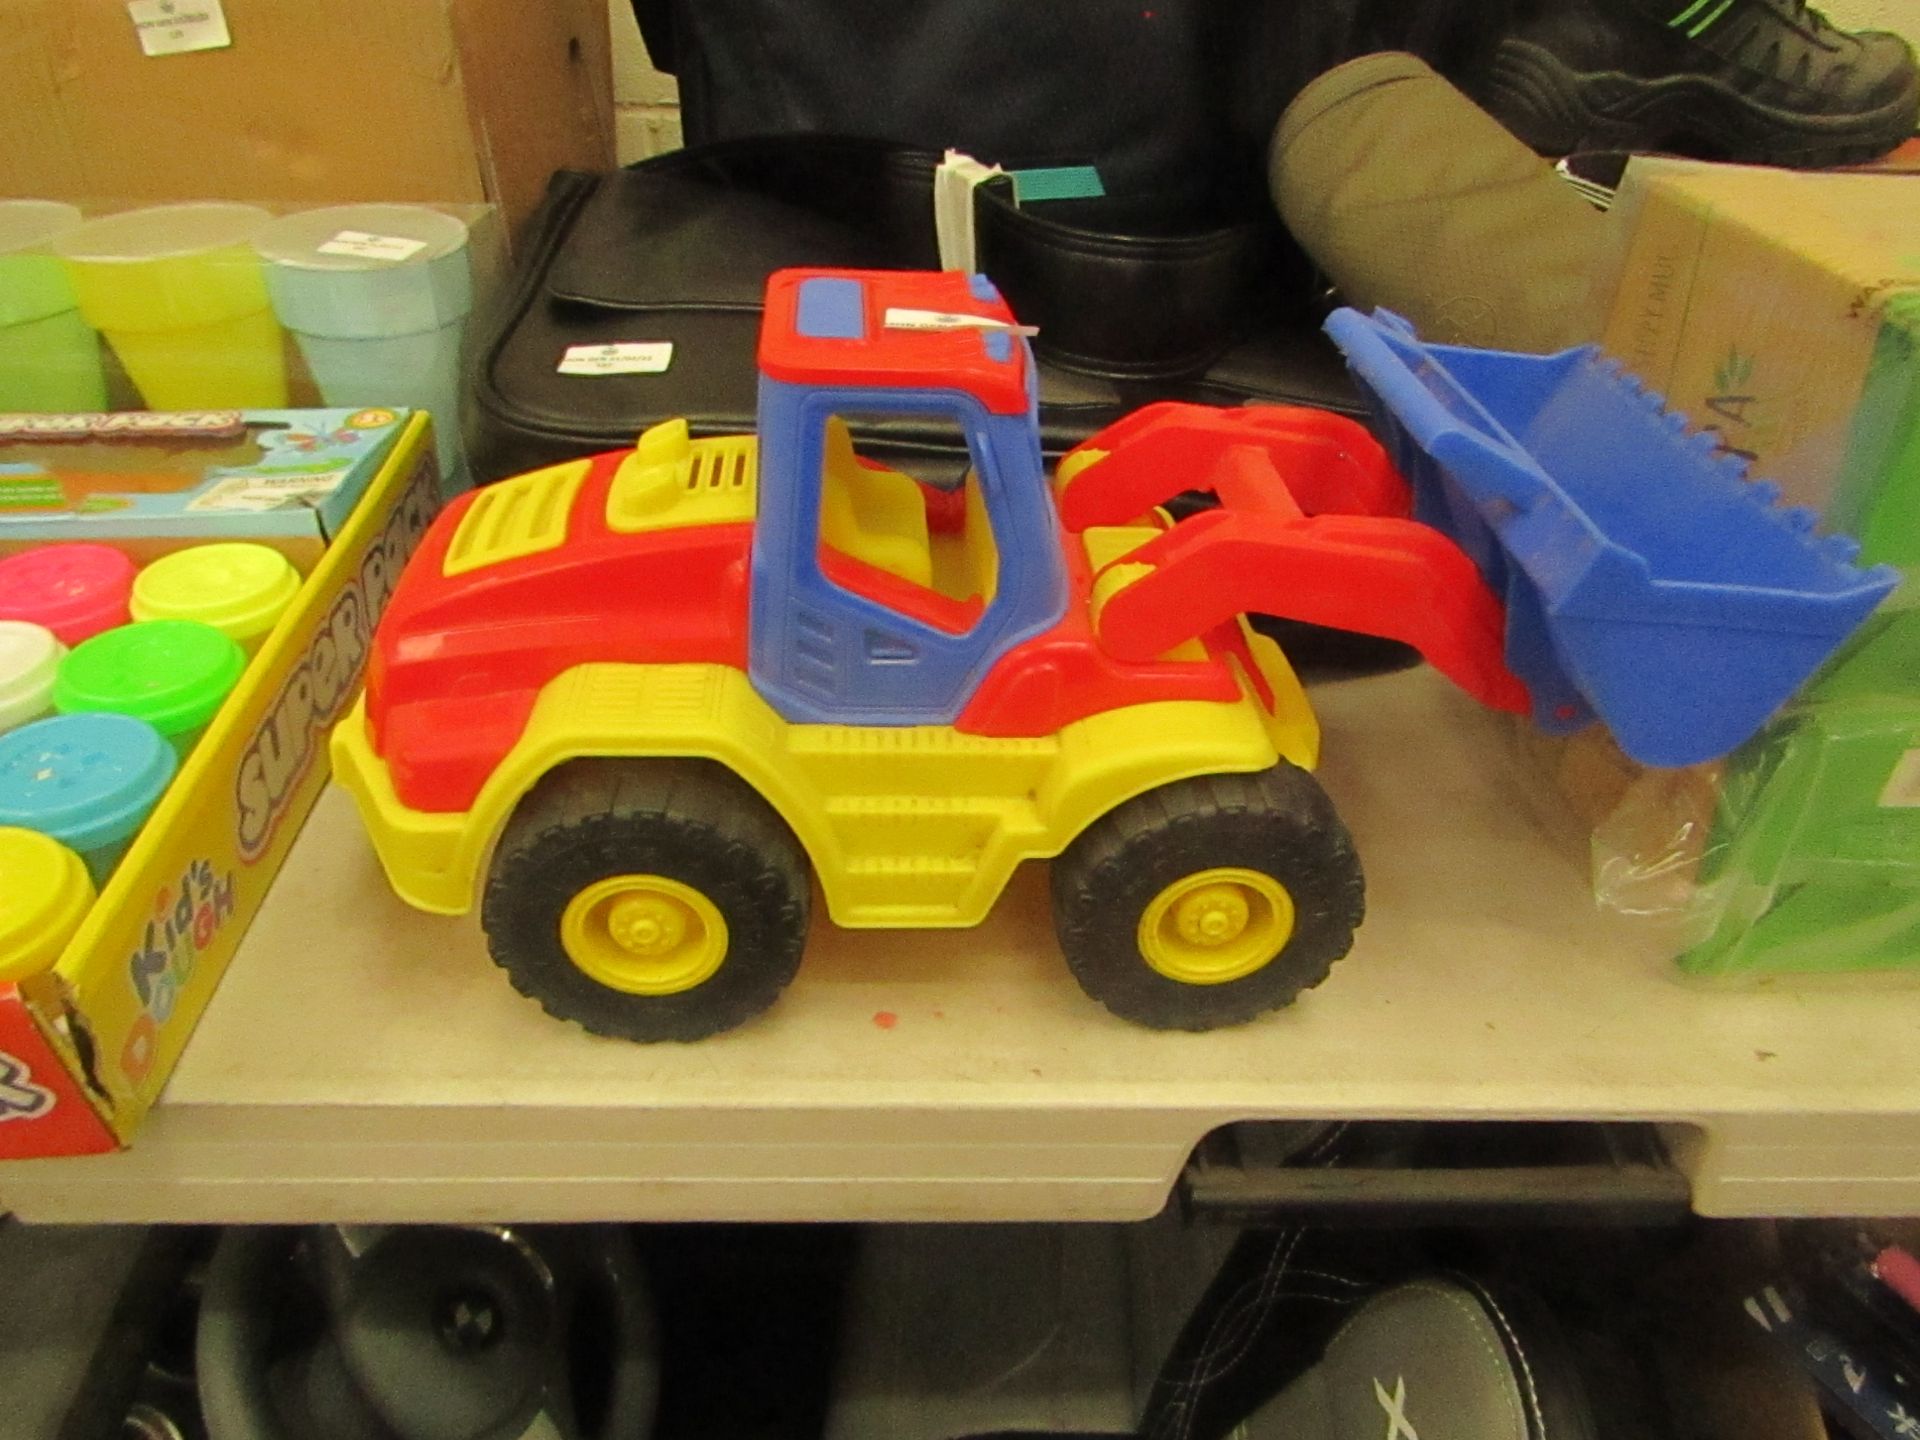 Small Toy Digger - No Packaging.